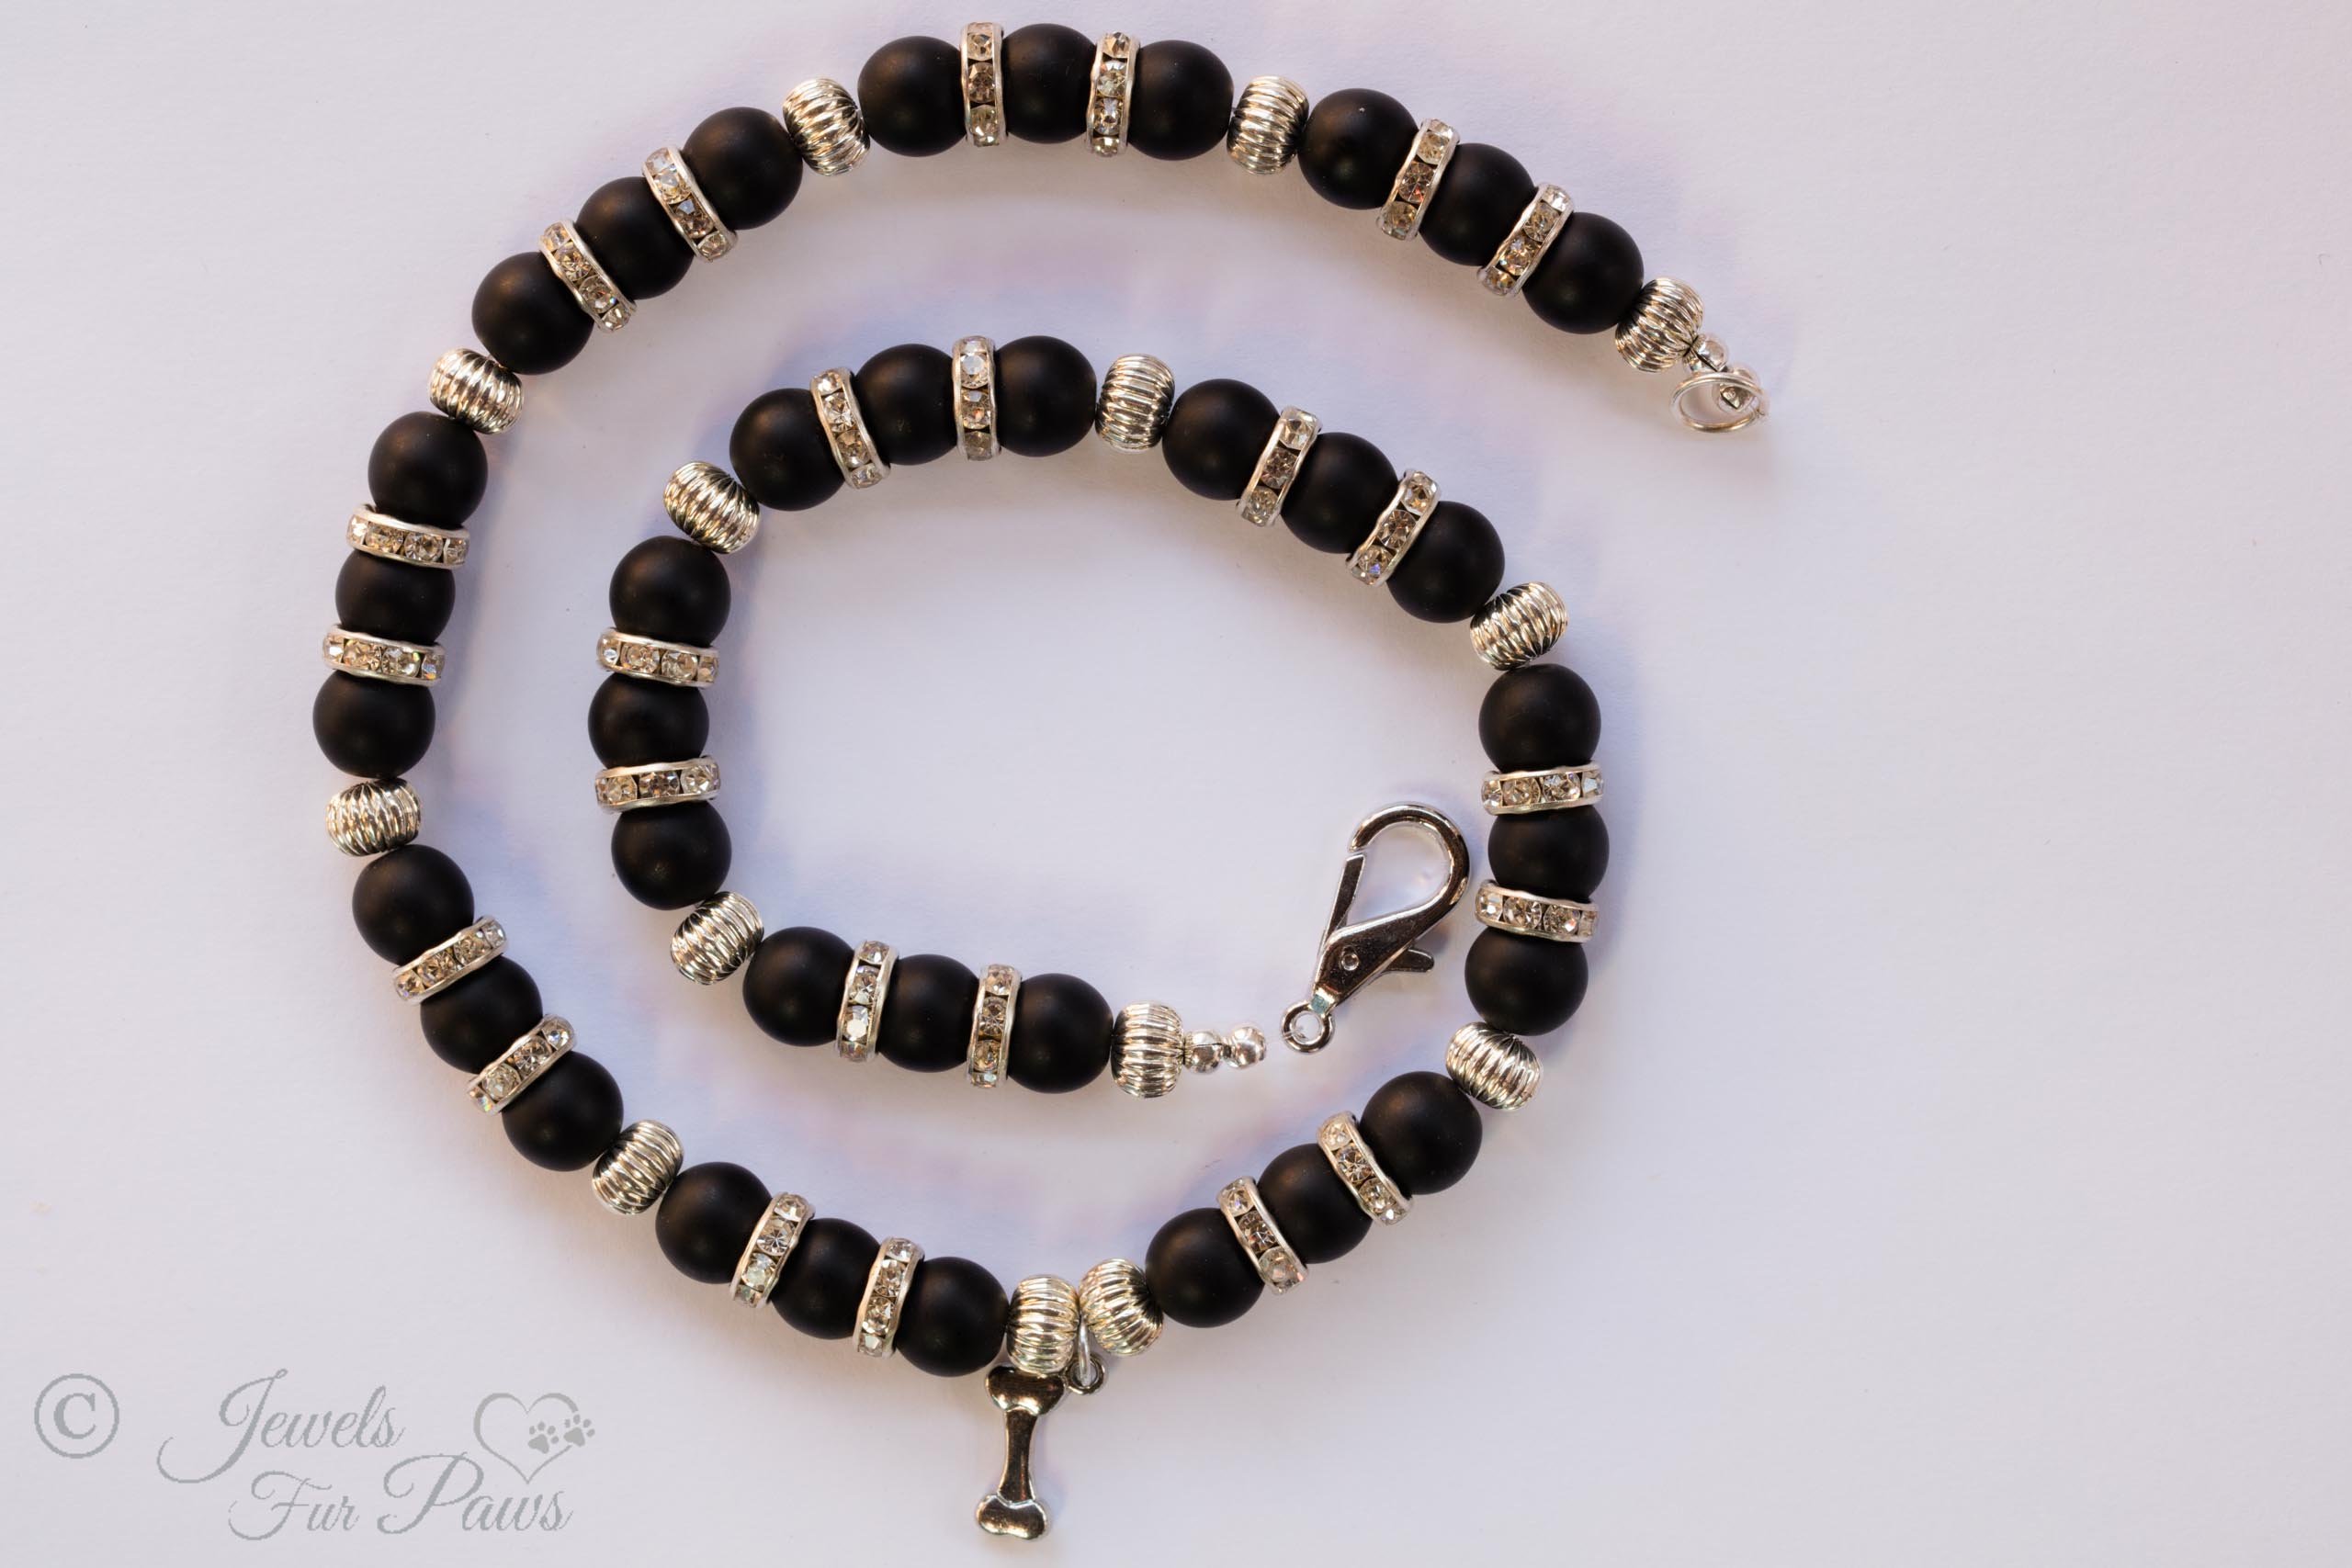 cat dog pet necklace natural black lava round beads with swarovski channel set spacers and silver rondels with hanging bone charm on white background